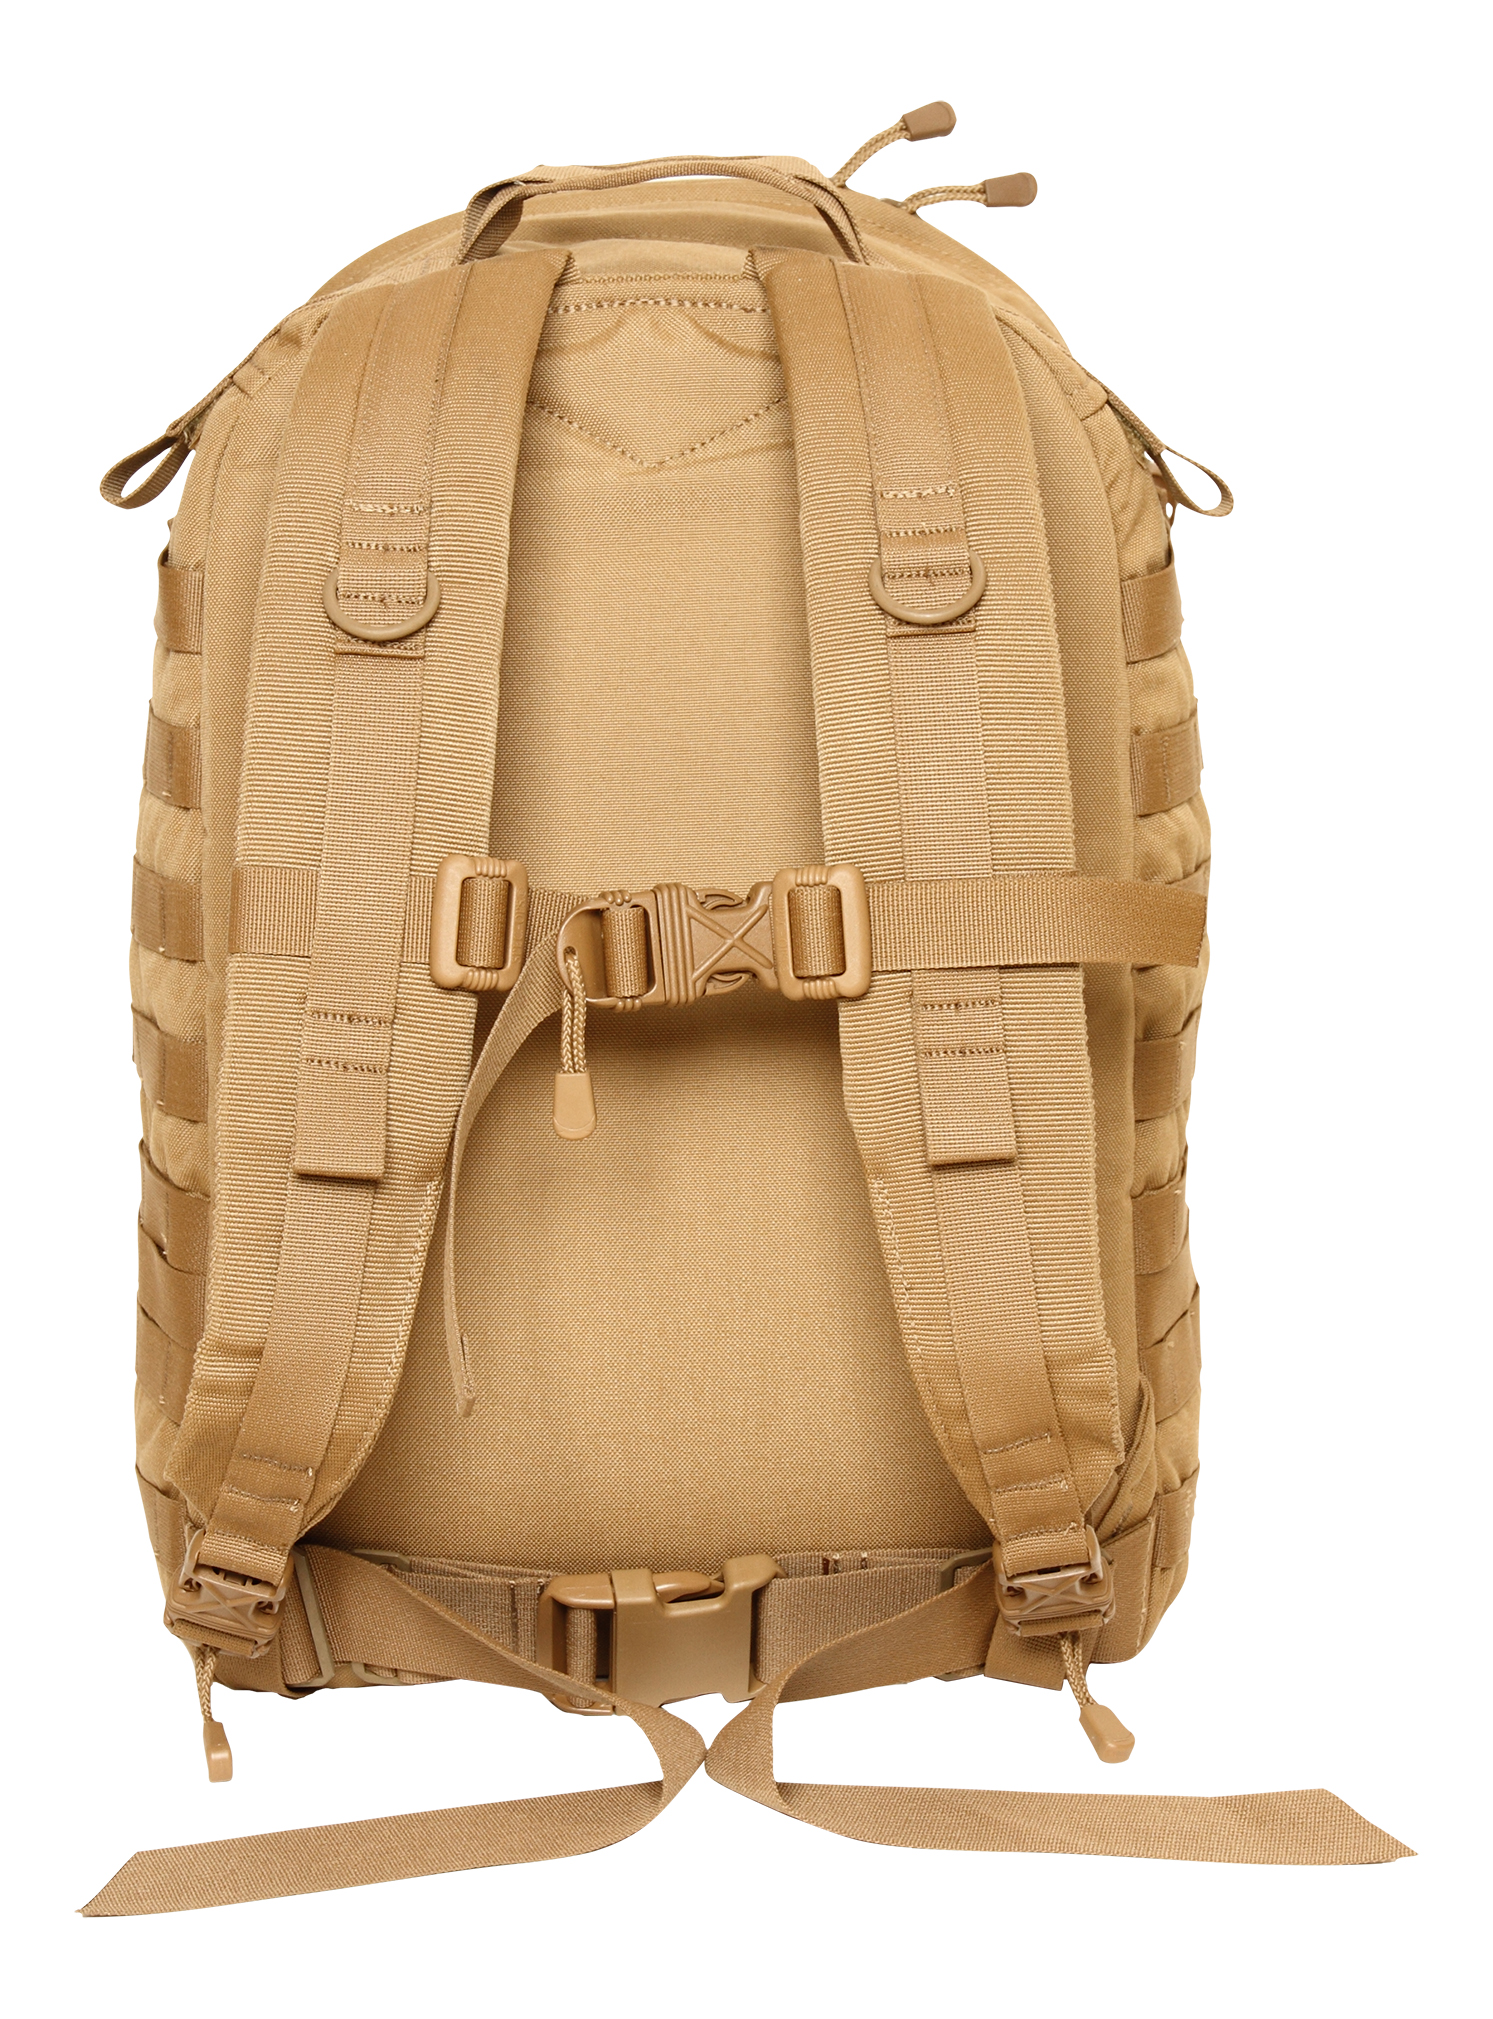 Spec Ops THE Pack Tactical Coyote Brown USA Made 